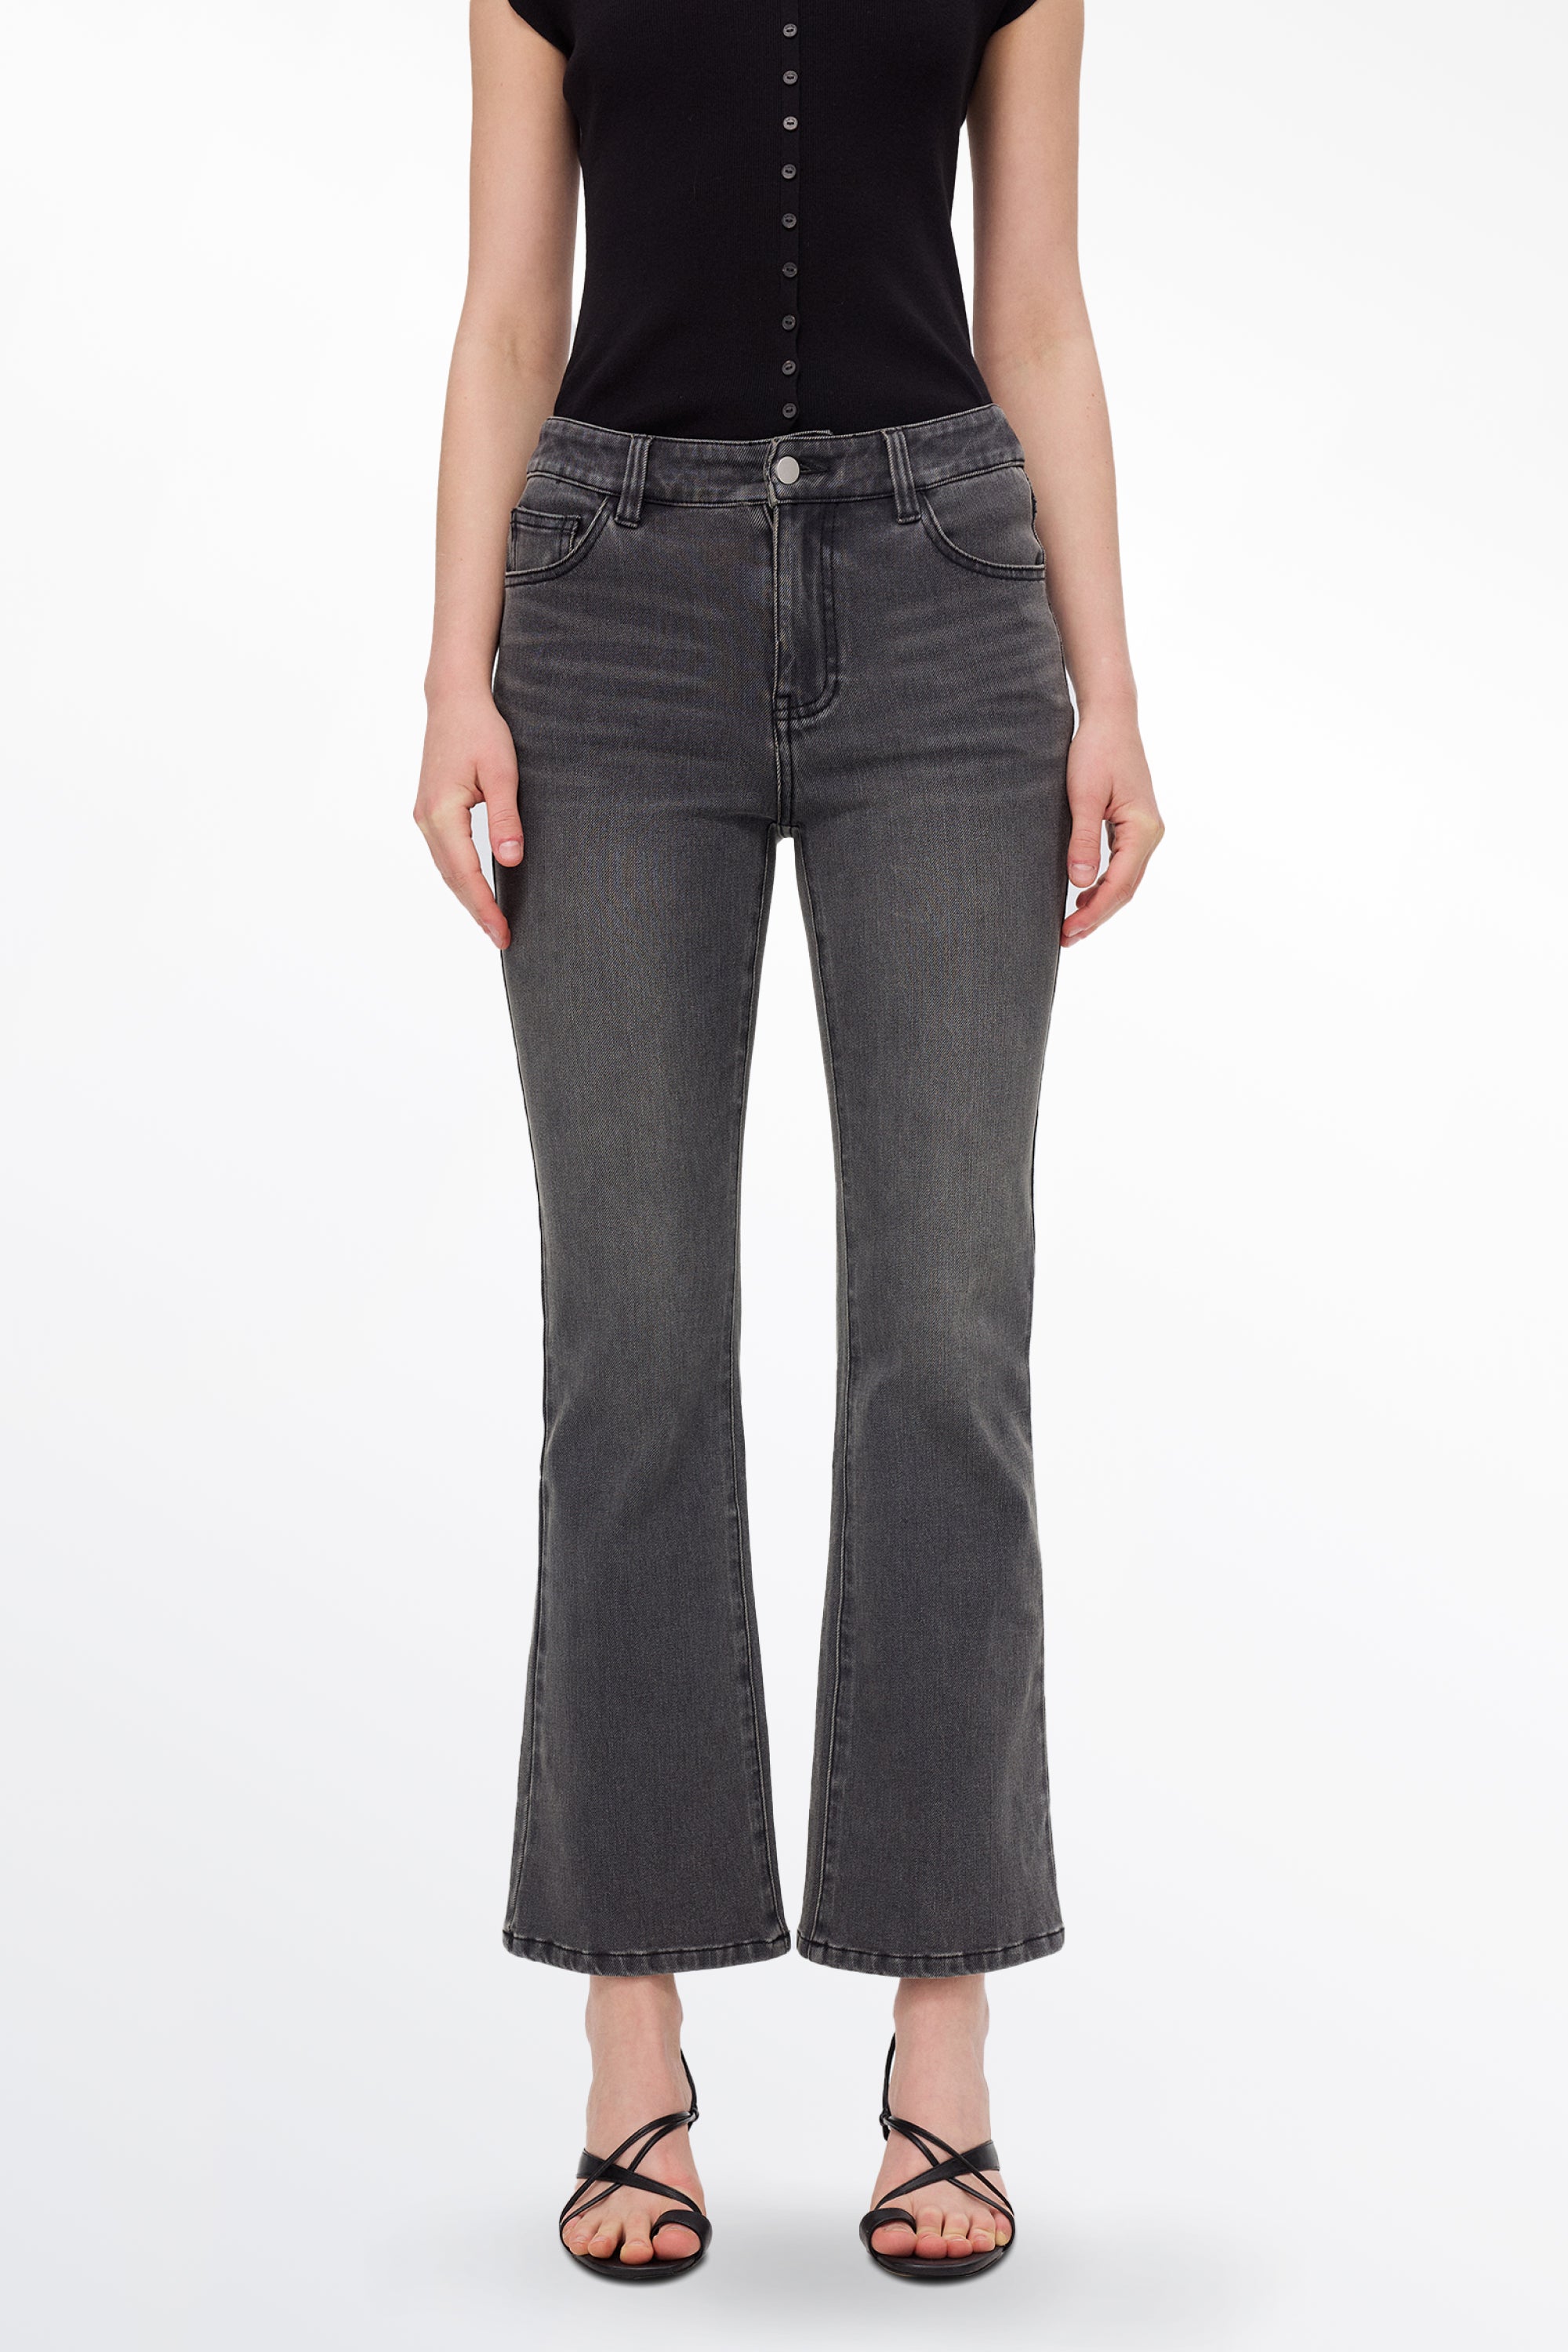 Nora Cropped Bell Bottom Jeans in Cotton Blend Denim